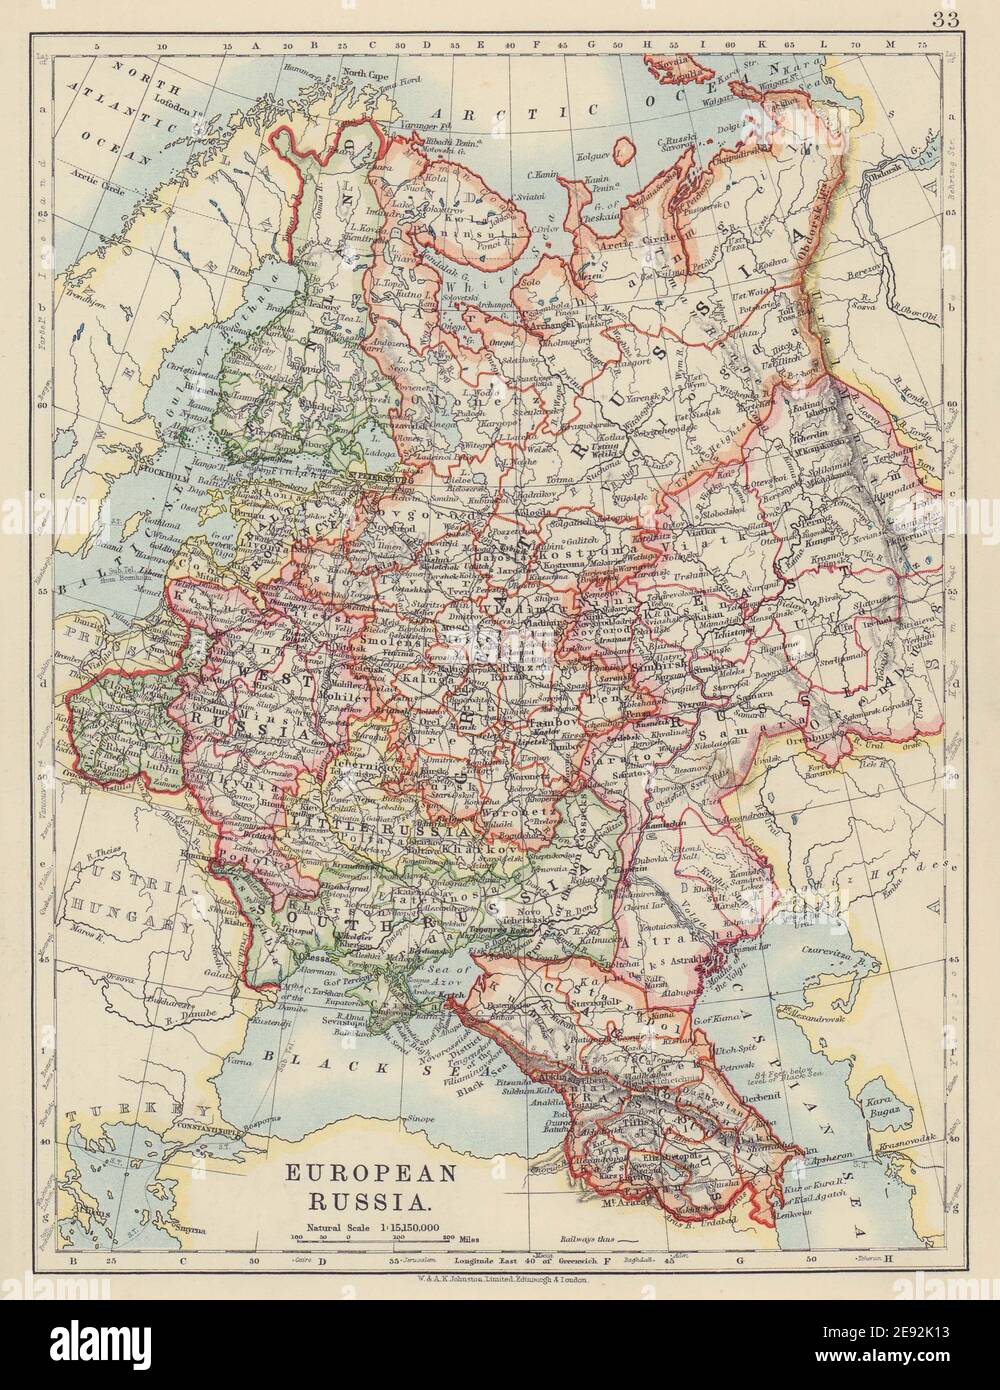 RUSSIA EUROPEA. Mostra Great/Little/West/South Russia. Polonia. JOHNSTON 1910 mappa Foto Stock